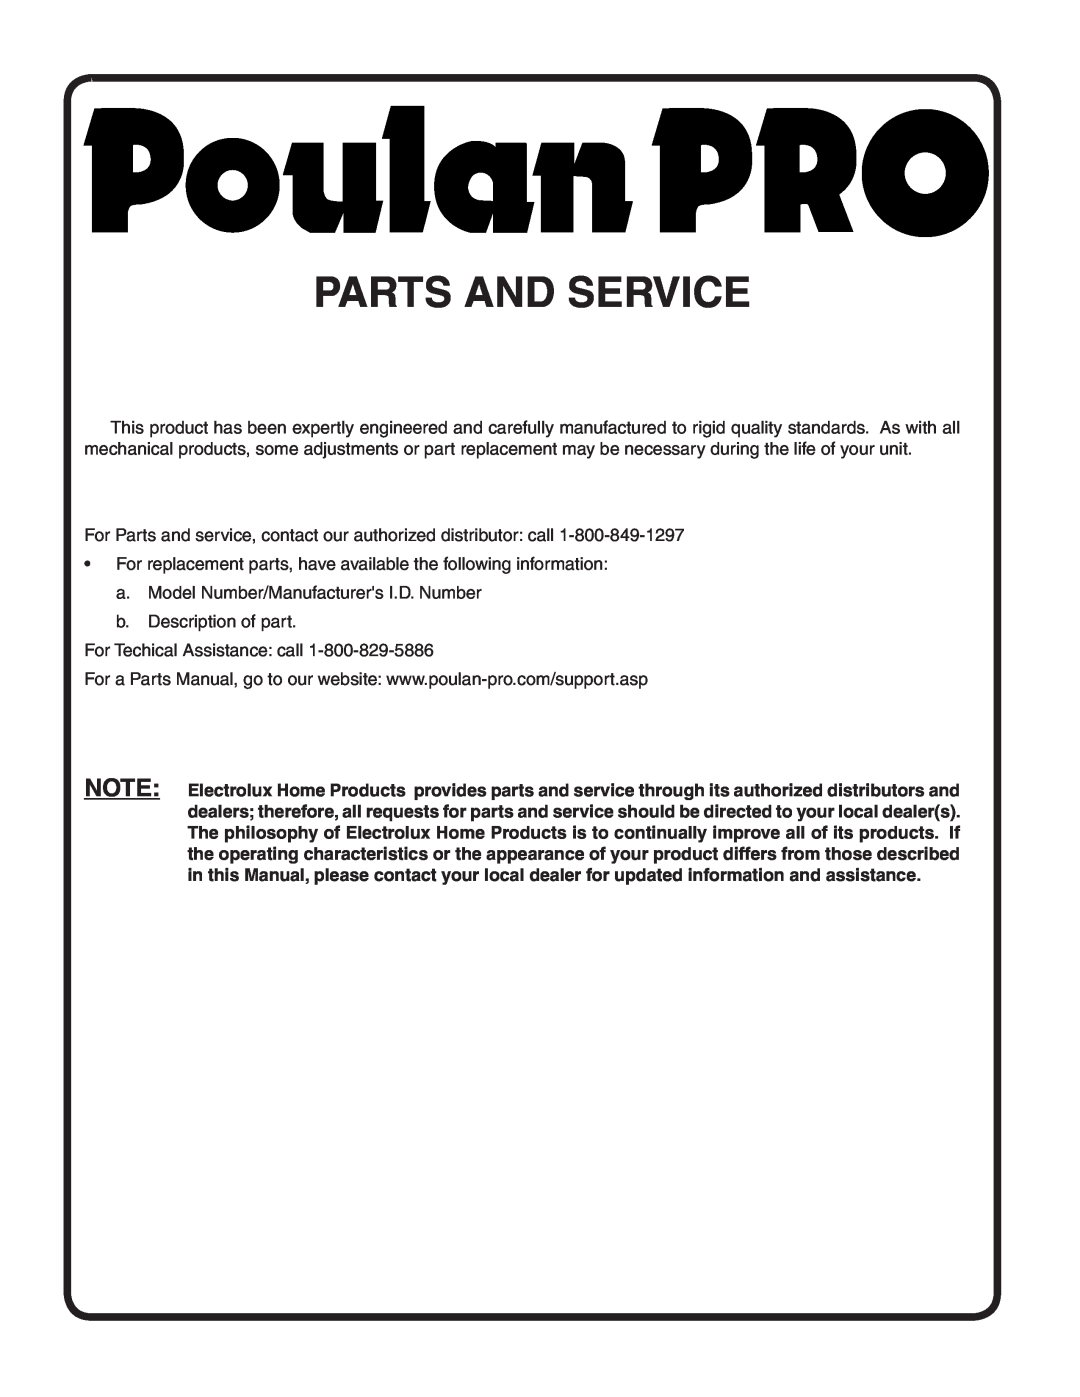 Poulan 96042001000, 402557 manual Parts And Service 